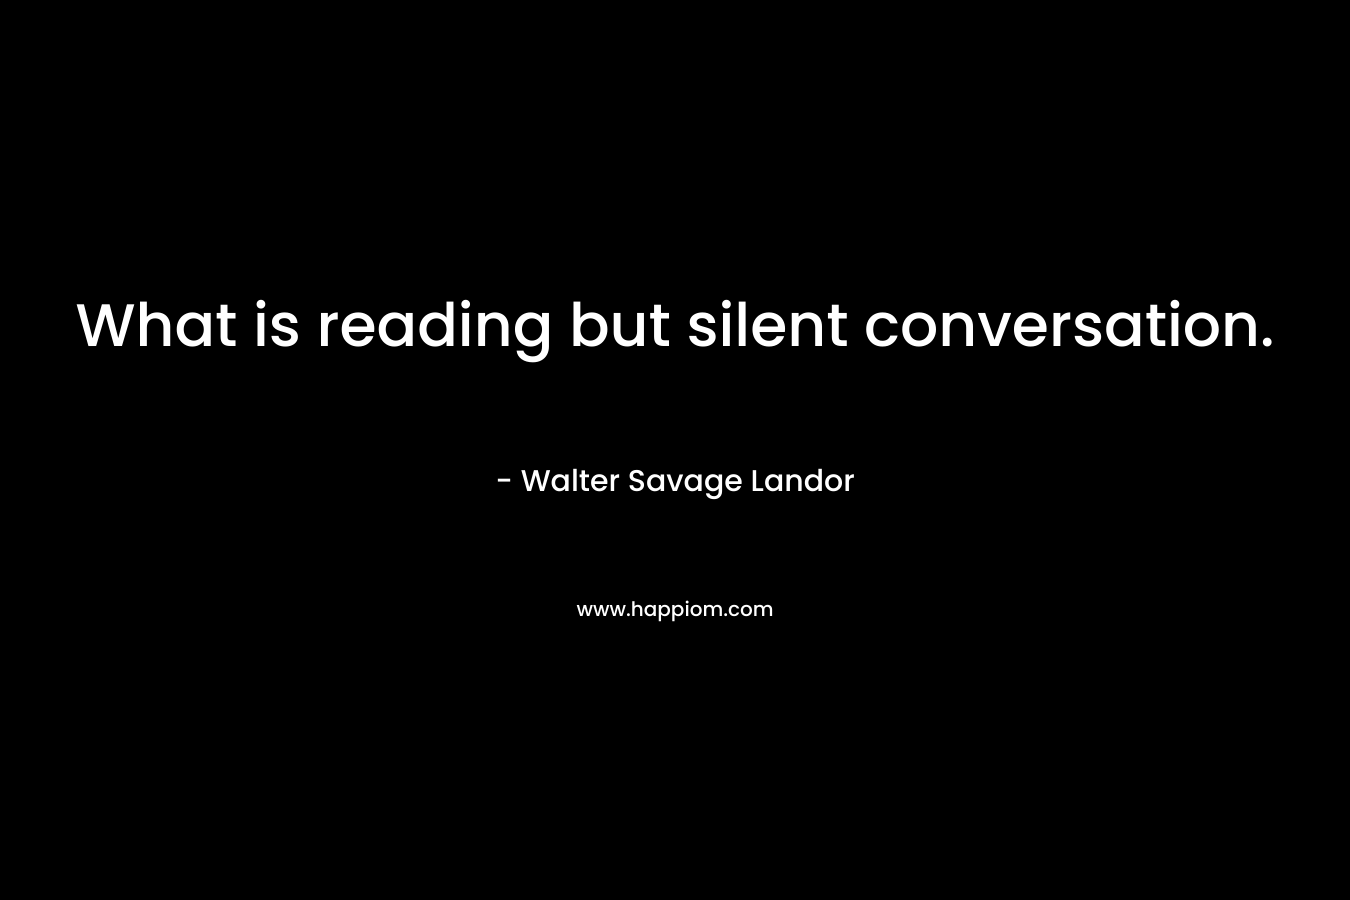 What is reading but silent conversation.